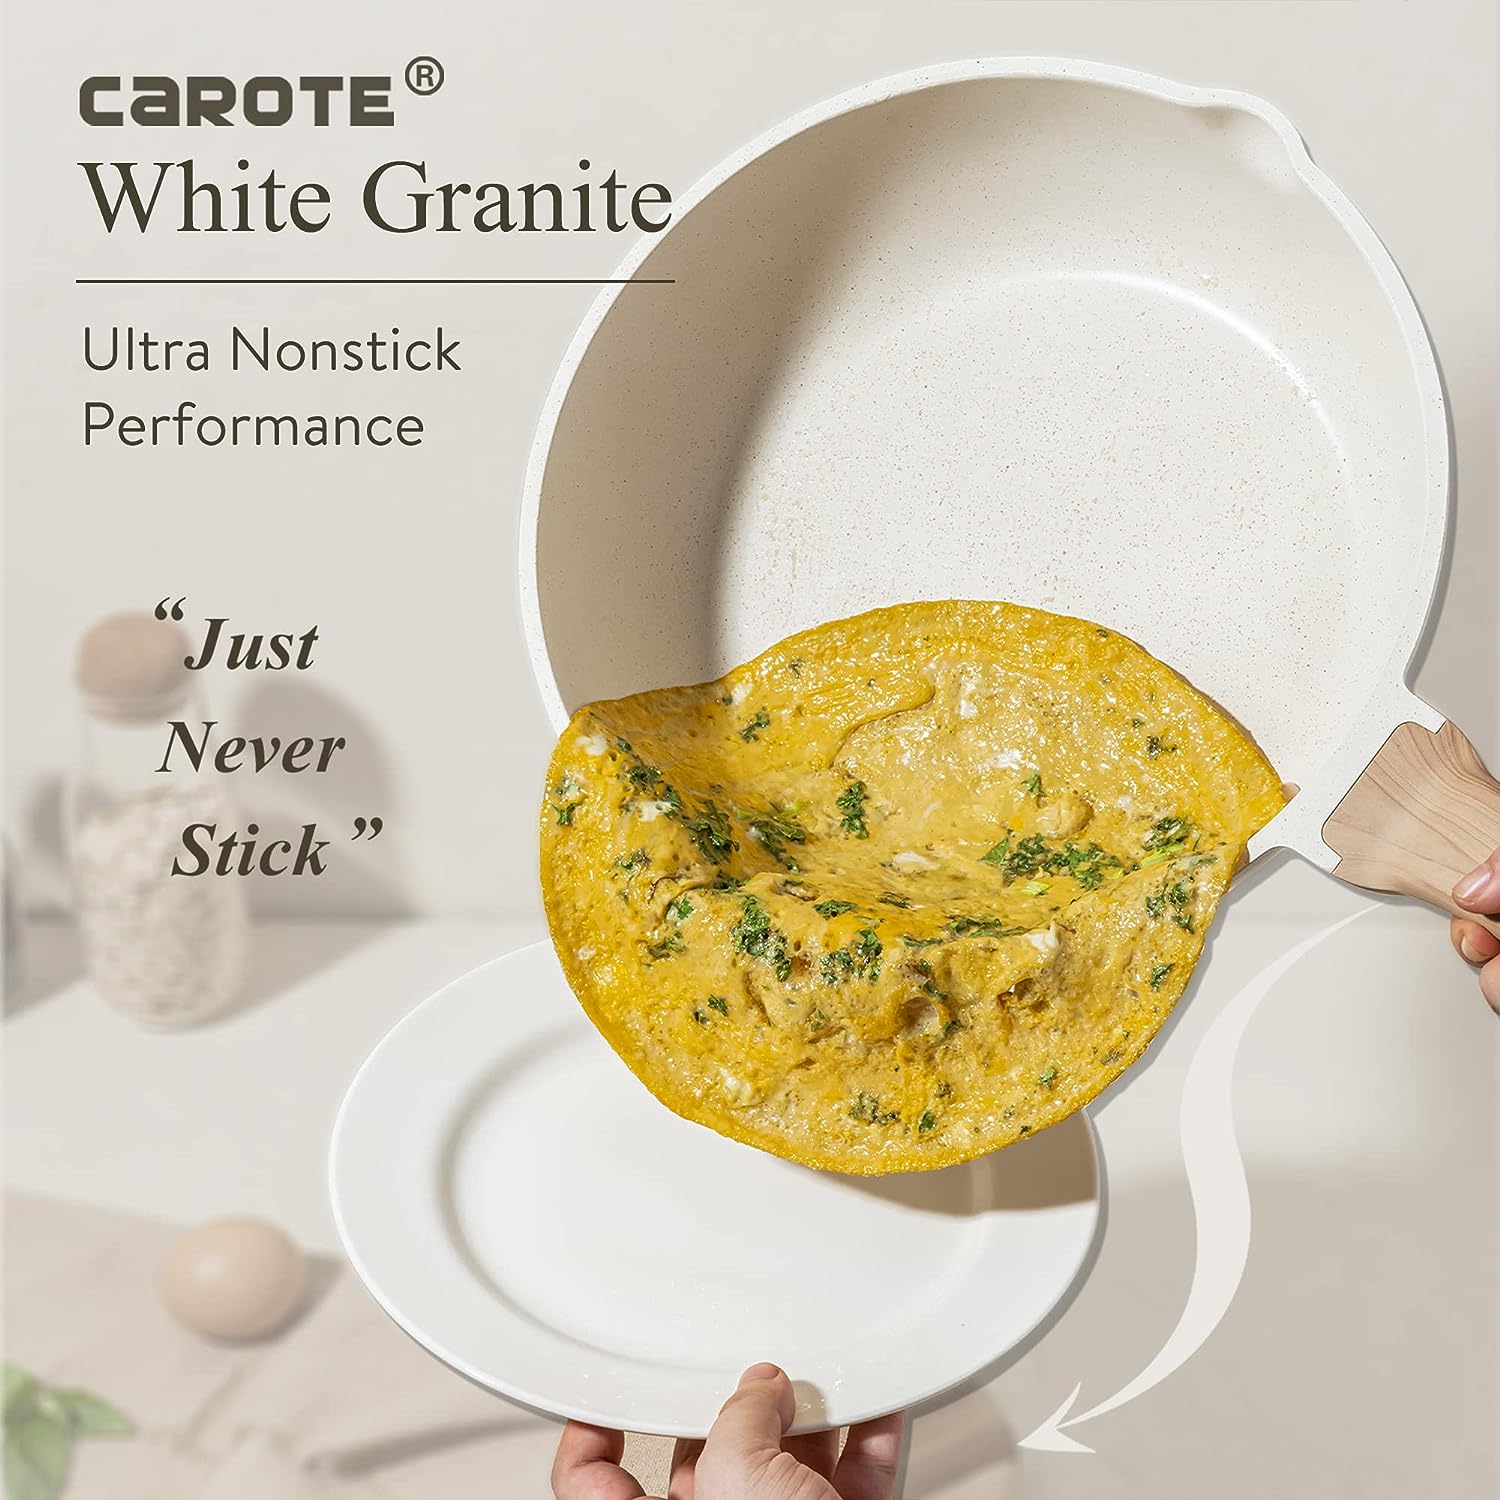 carote 10 piece pots and pans